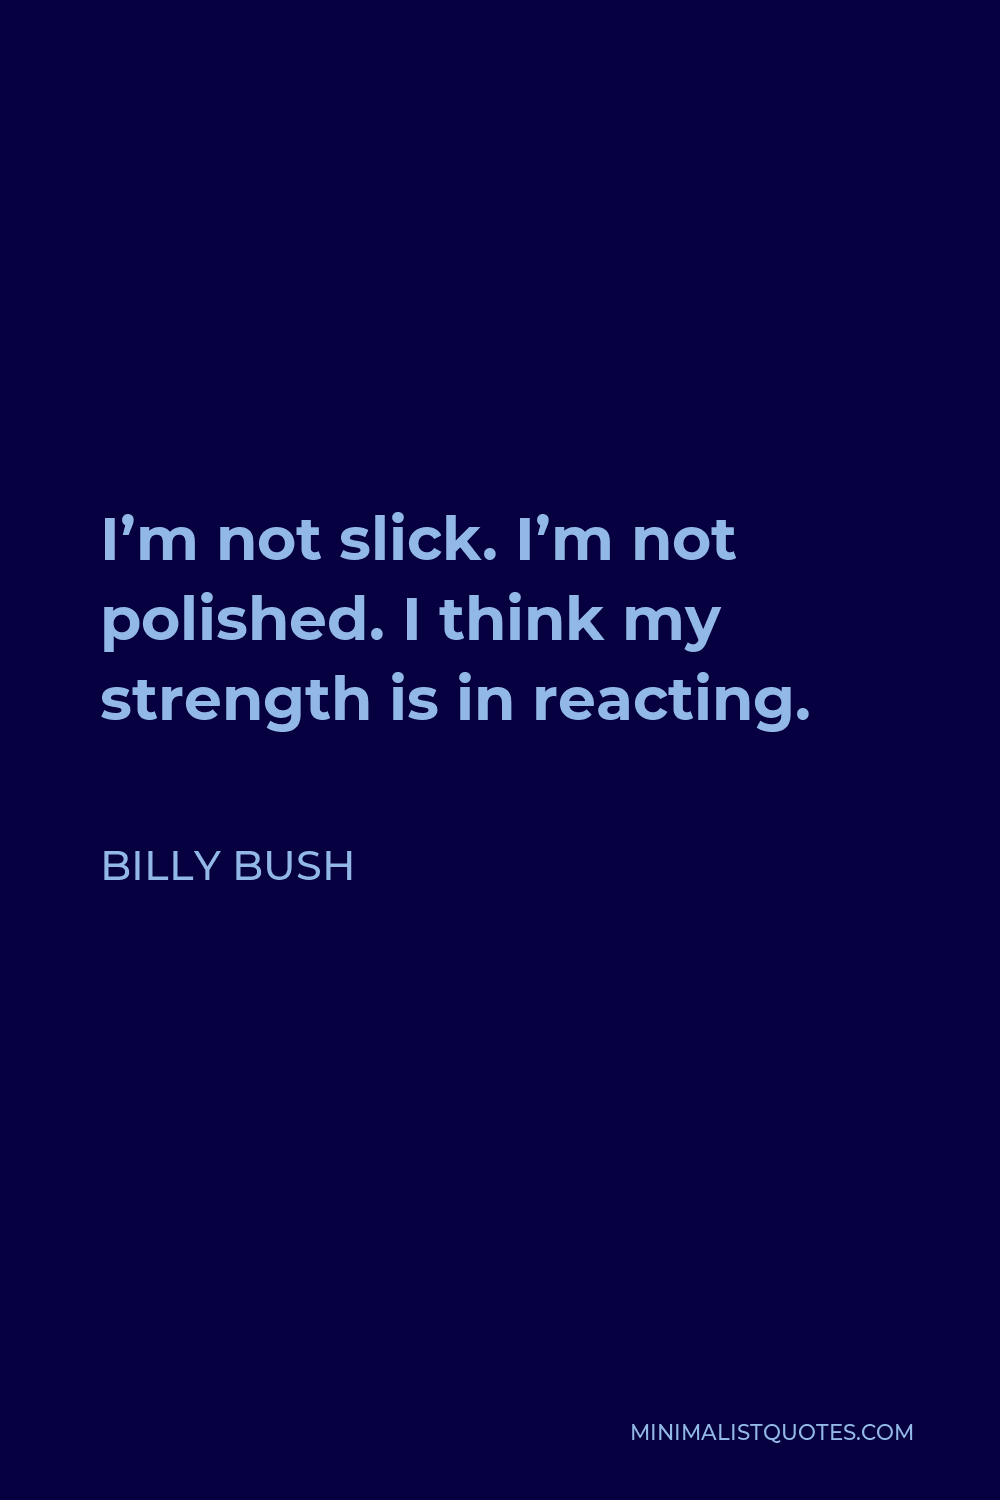 Billy Bush Quote - I’m not slick. I’m not polished. I think my strength is in reacting.